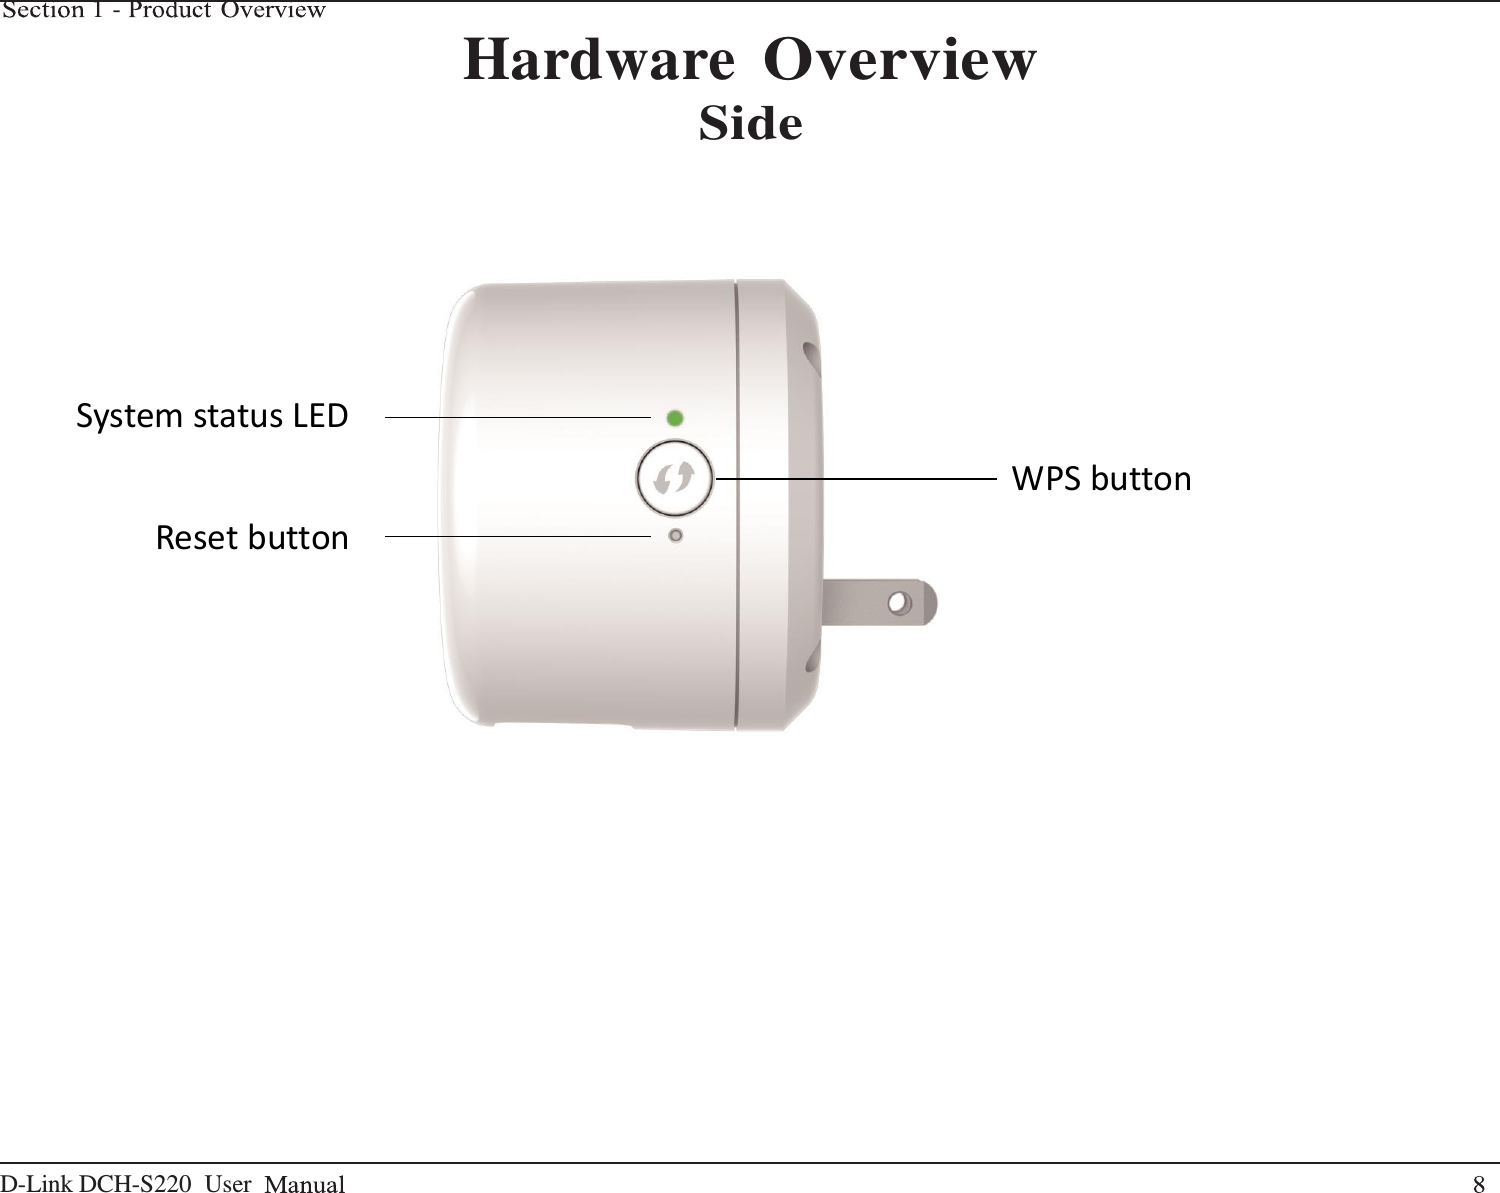 D-Link DCH-S220  User    1 -     Hardware Overview Side                            System status LED Reset button WPS button 